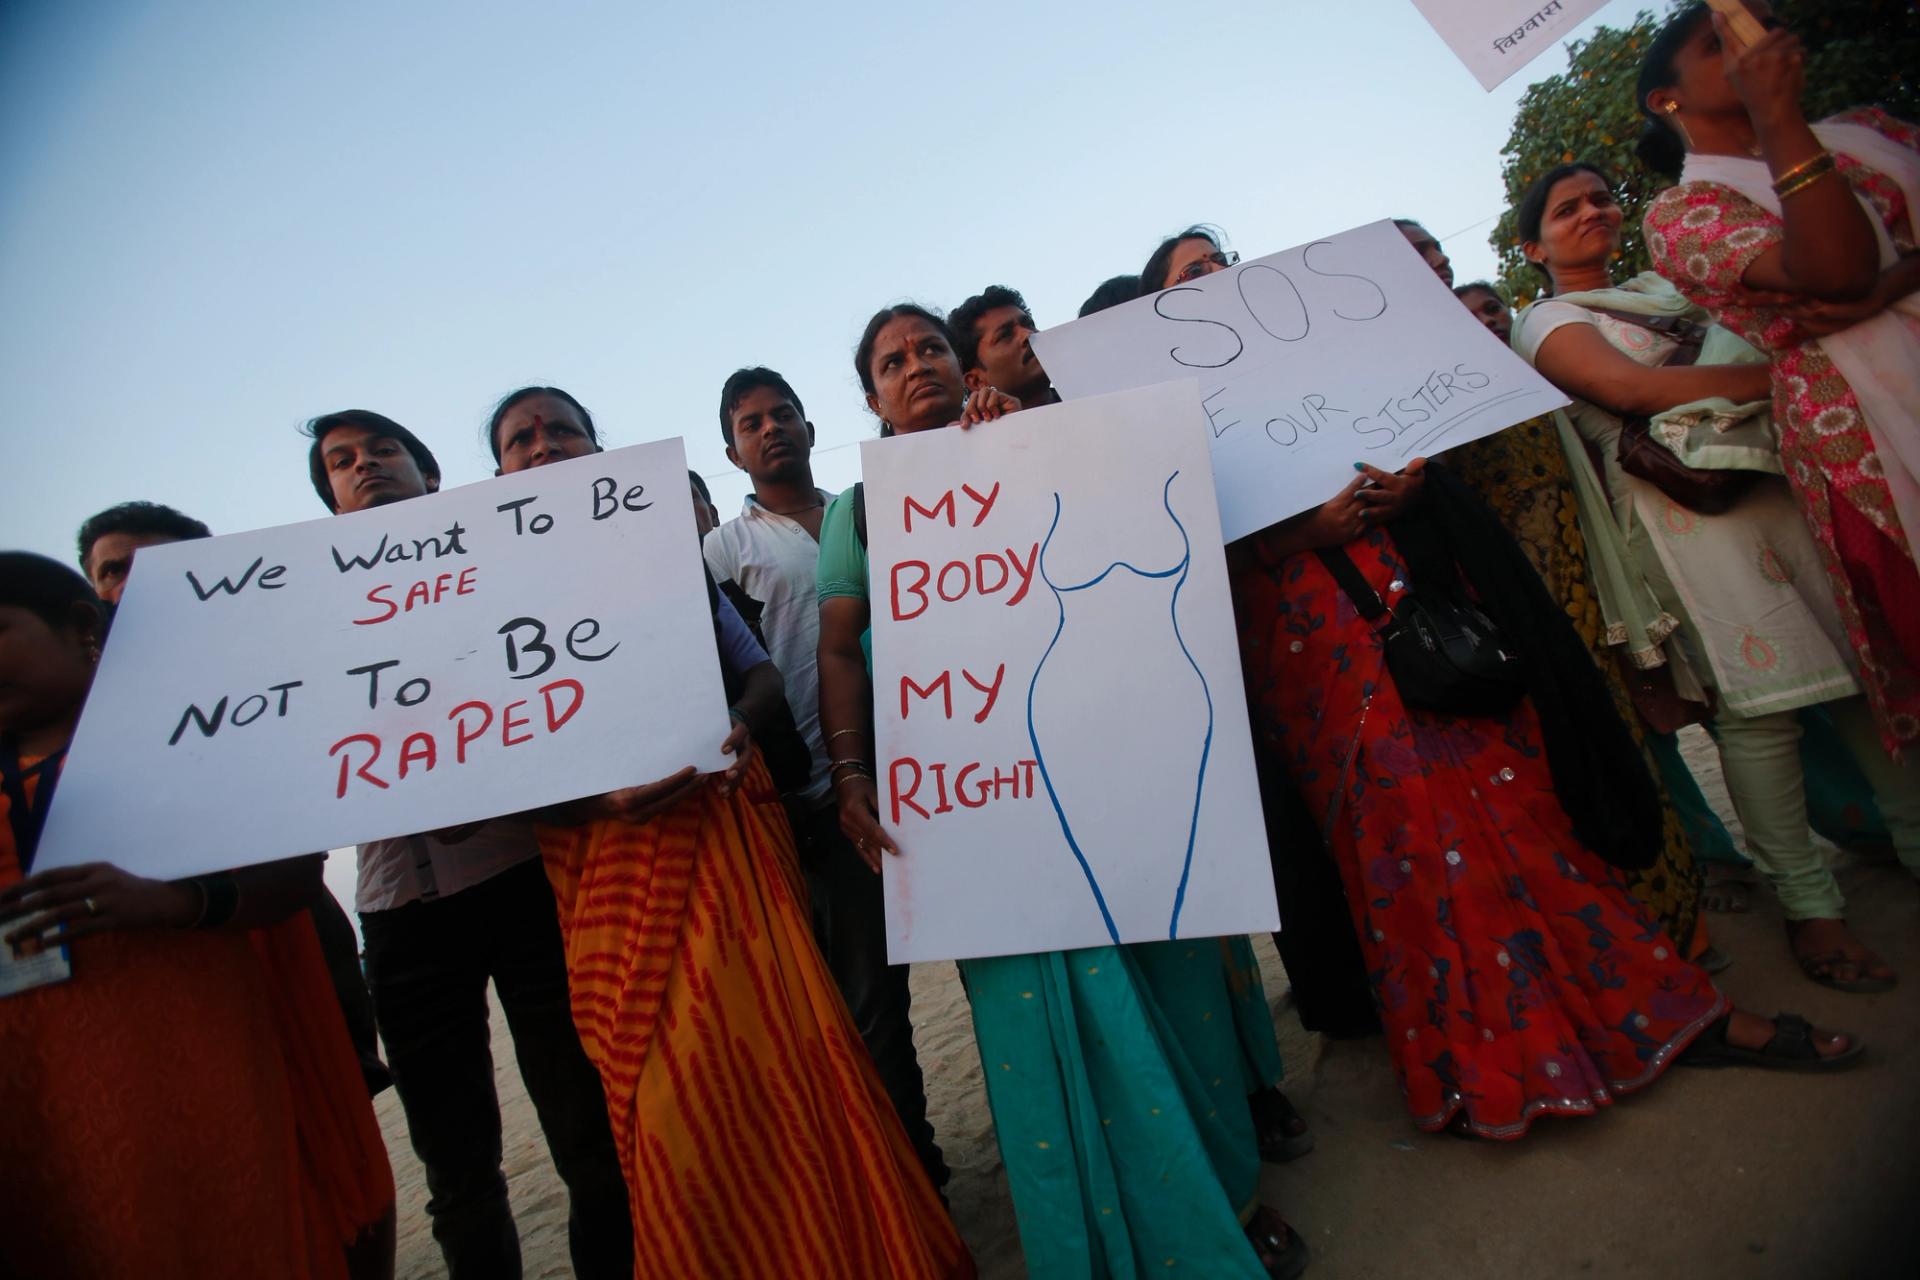 A protest against rape in New Delhi in 2012